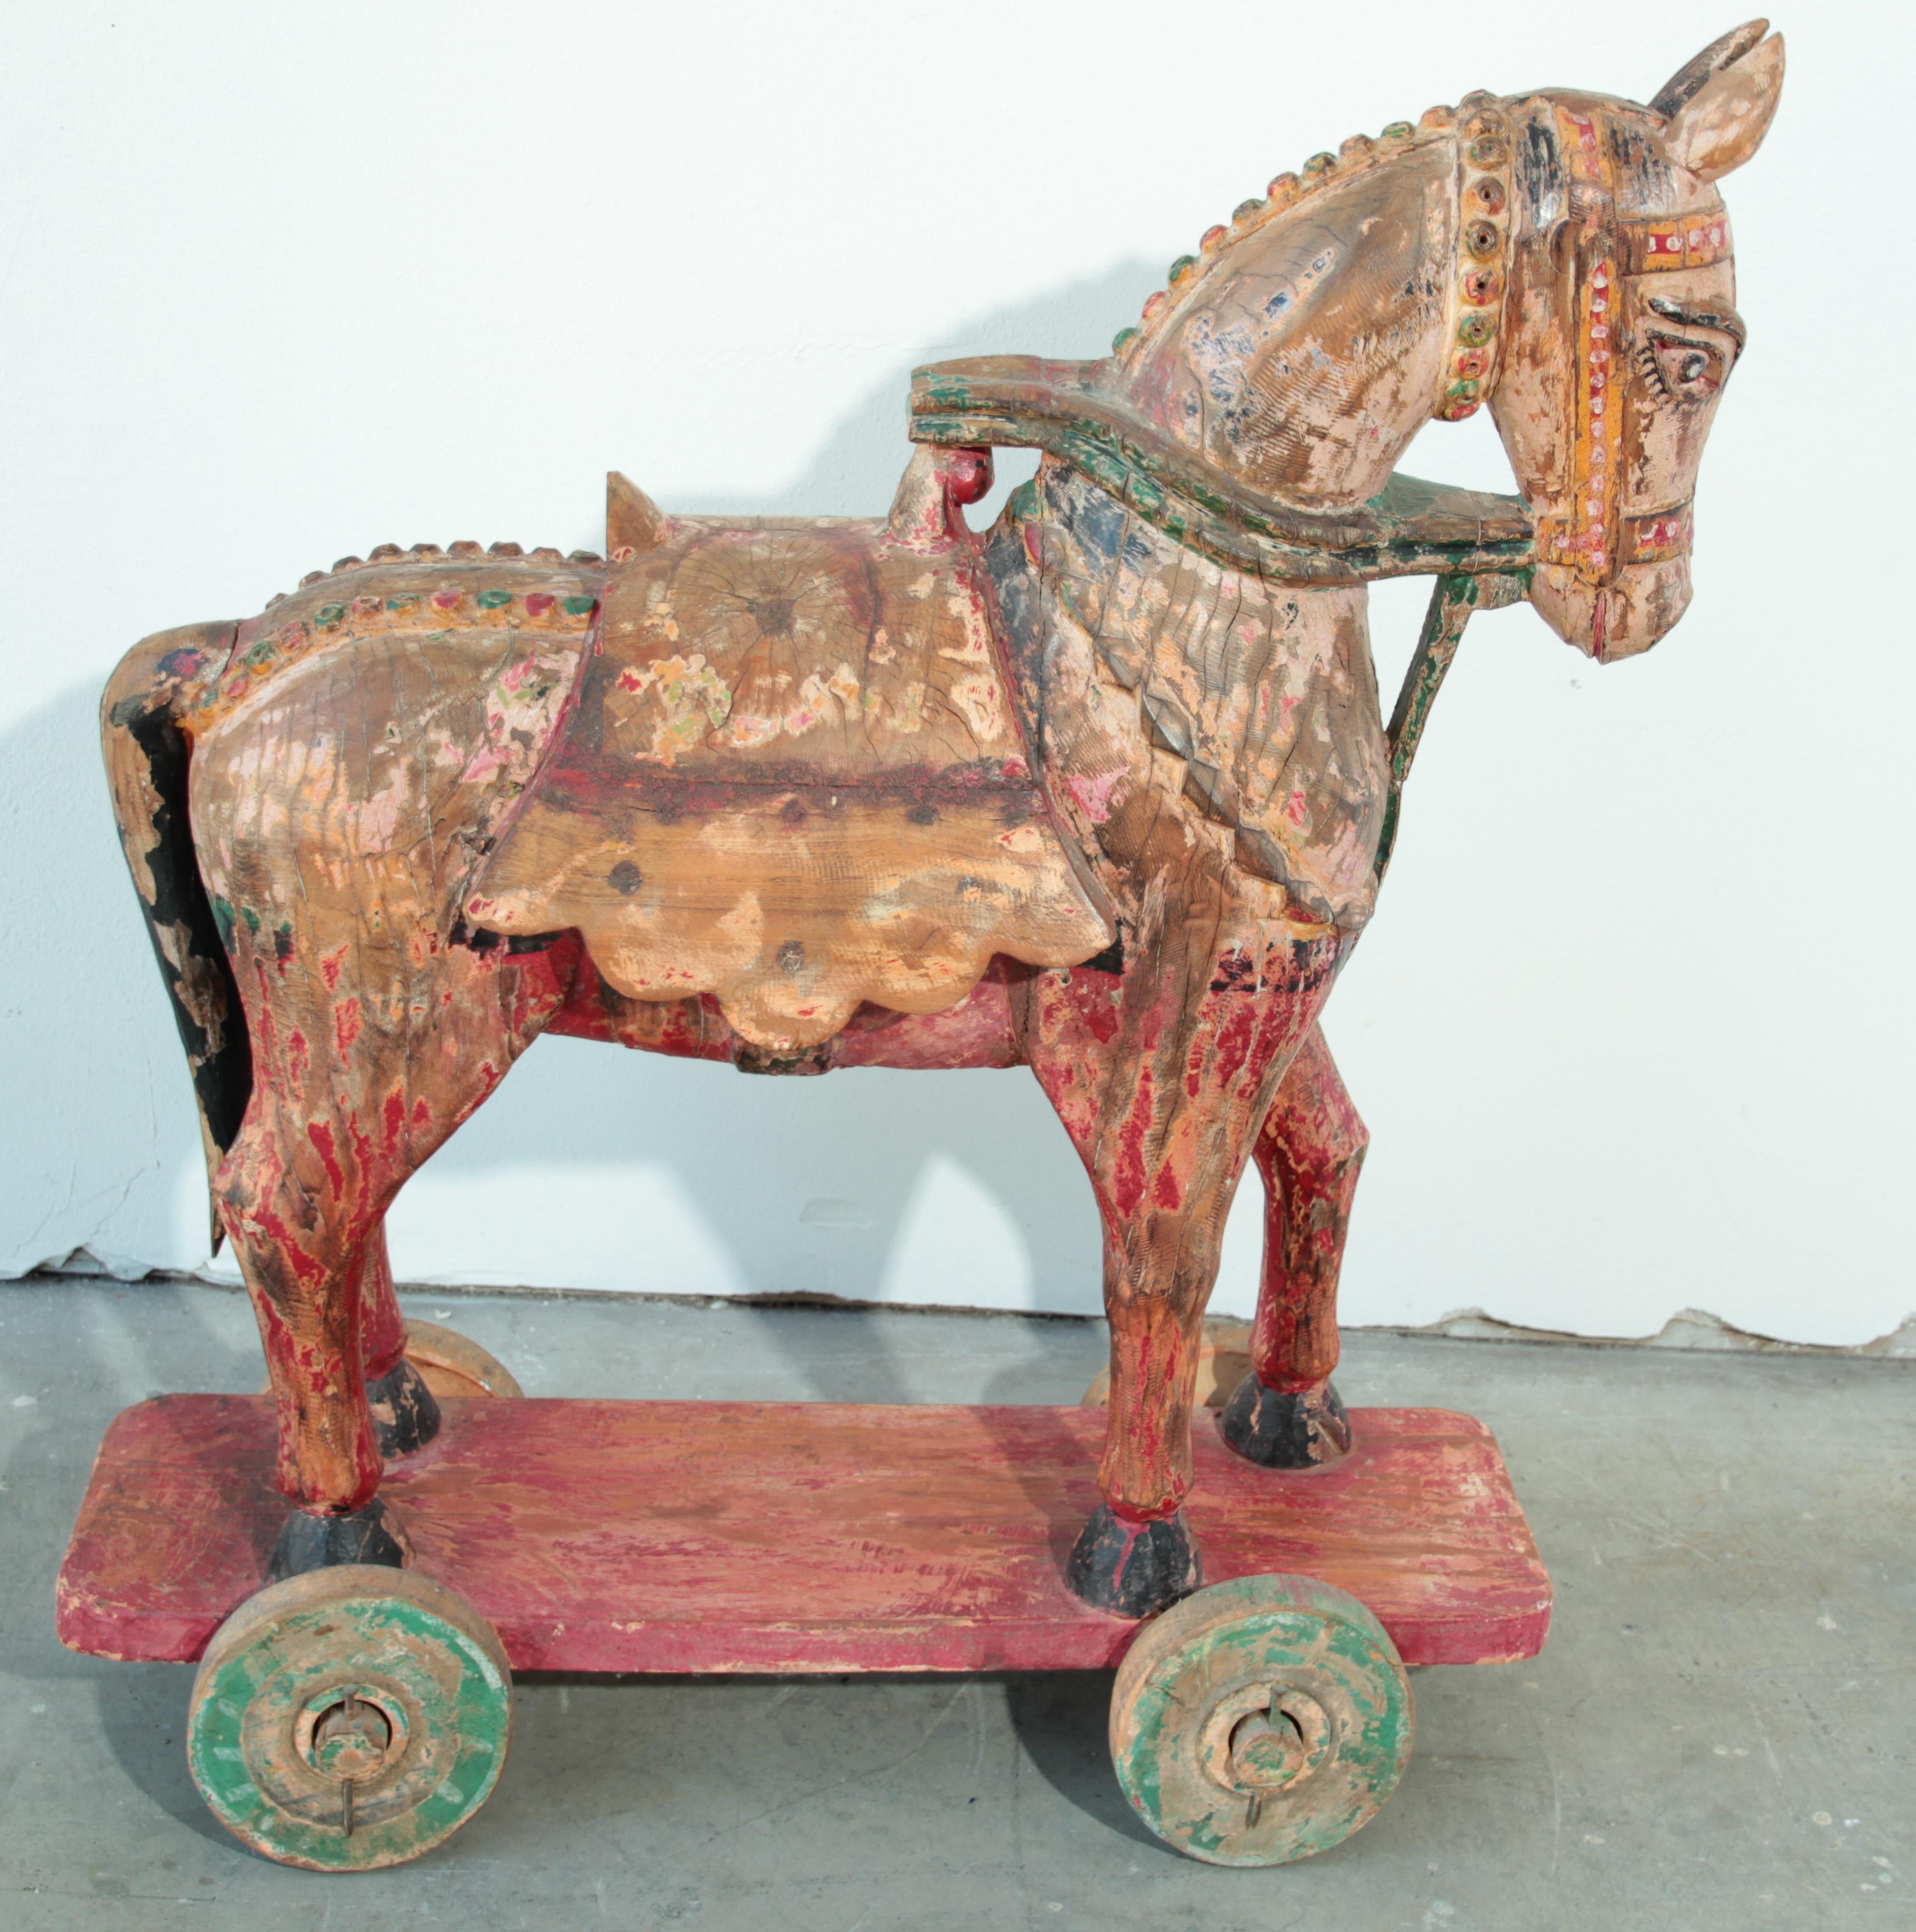 Antique Southeast Asian Polychrome Wooden Oversized Temple Horse from India.
Large Antique Southeast Asian Carved Polychrome Wood Horses.
Antique Southeast Asian carved wood model of a parade horse.
the body with allover polychrome, saddle and reins